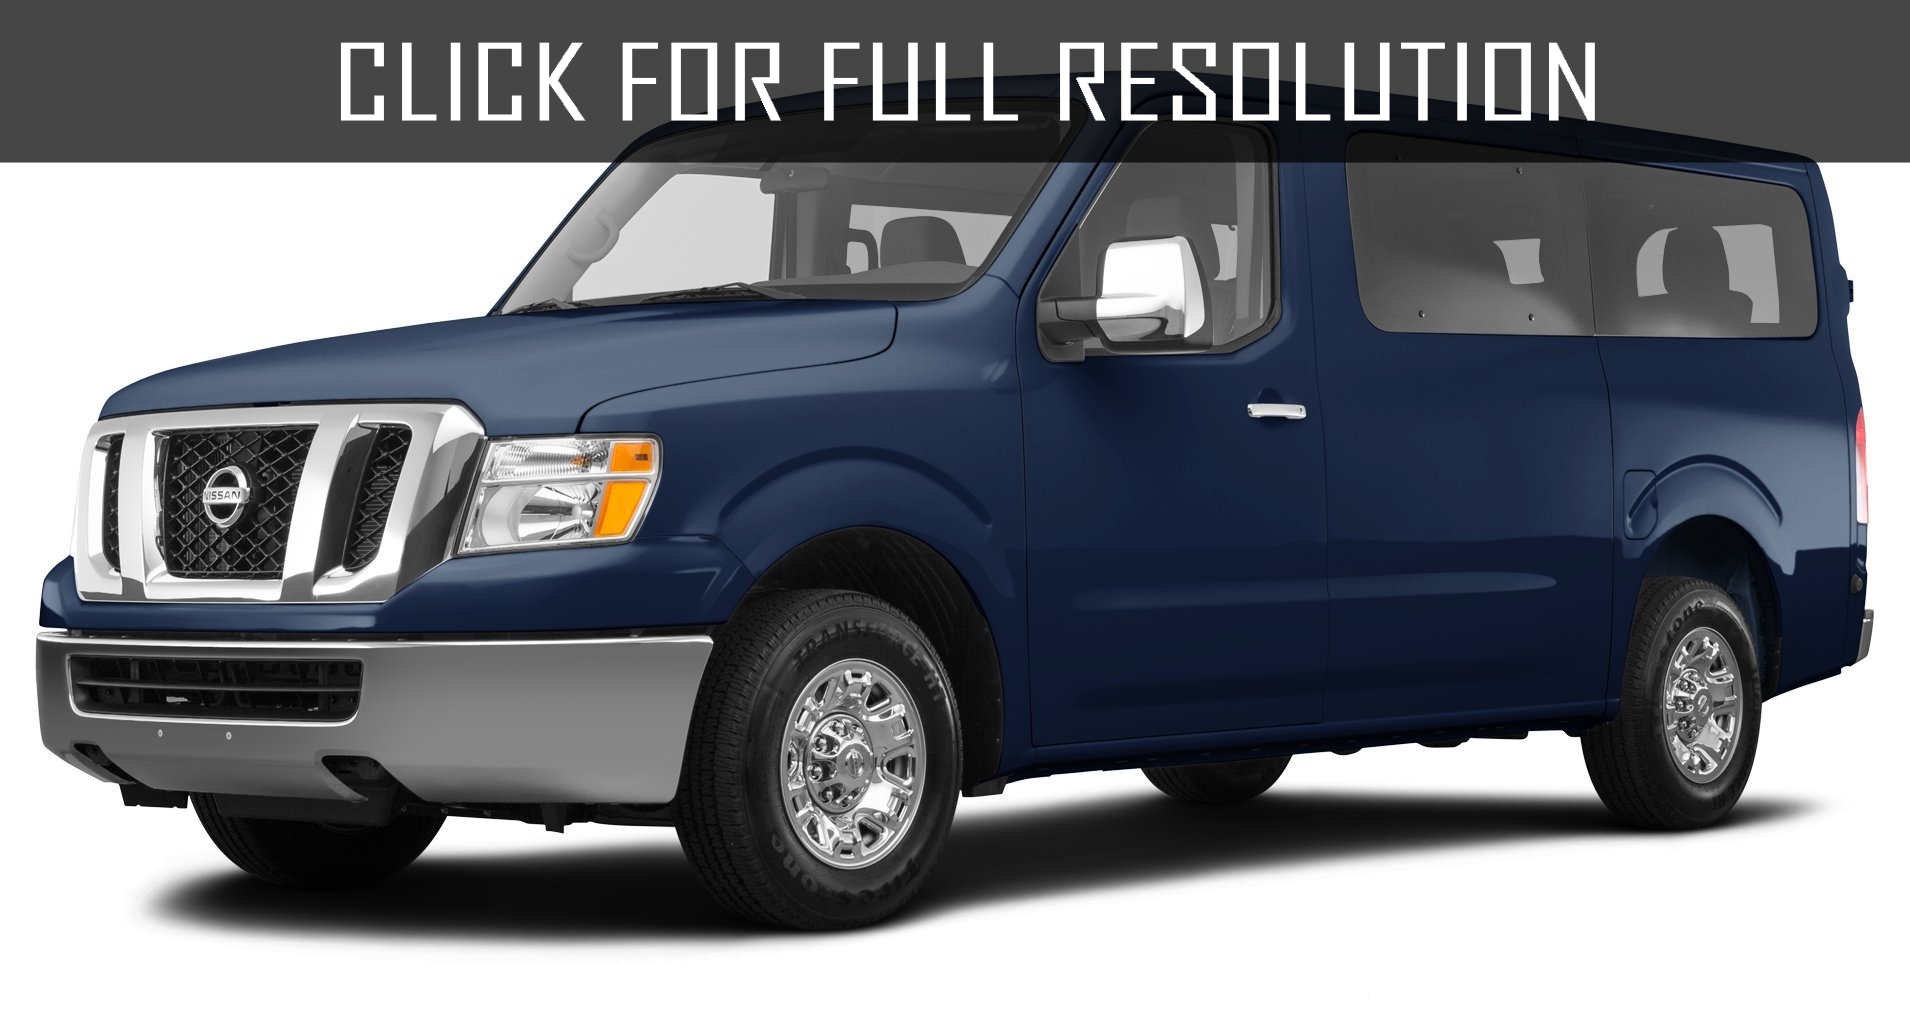 Nissan Nv 3500 amazing photo gallery, some information